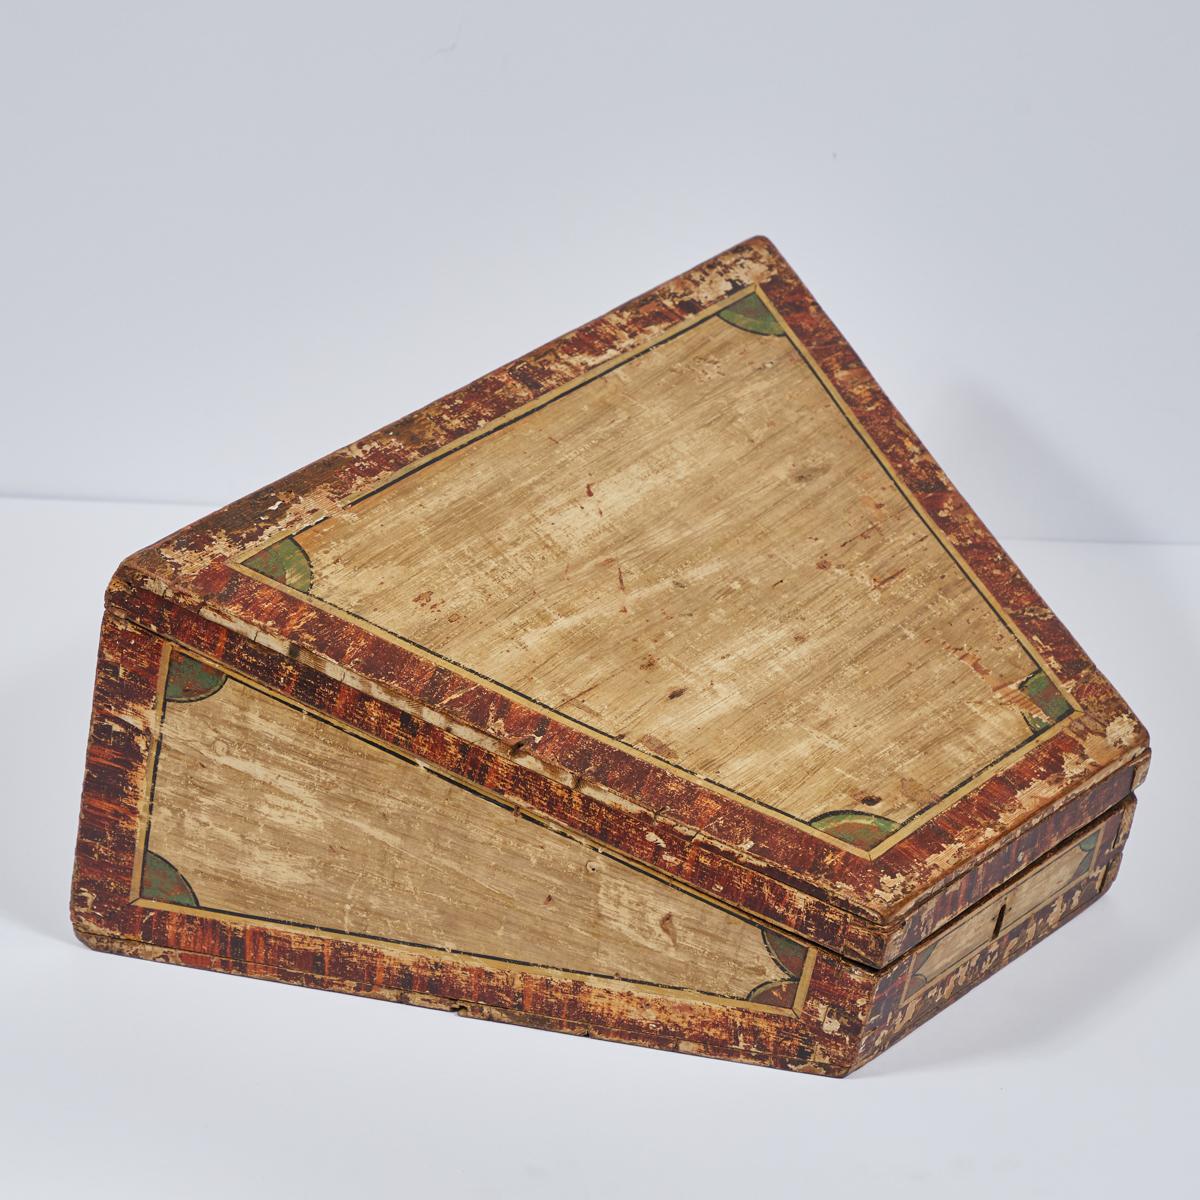 Traveling desk box from Georgian England. With Italiante metal carrying handle and lock, hand-painted faux bois siding and verdirgis demi-lune accents, the piece is handsome and whimsical at once. The trapezoidal shape makes for comfortable